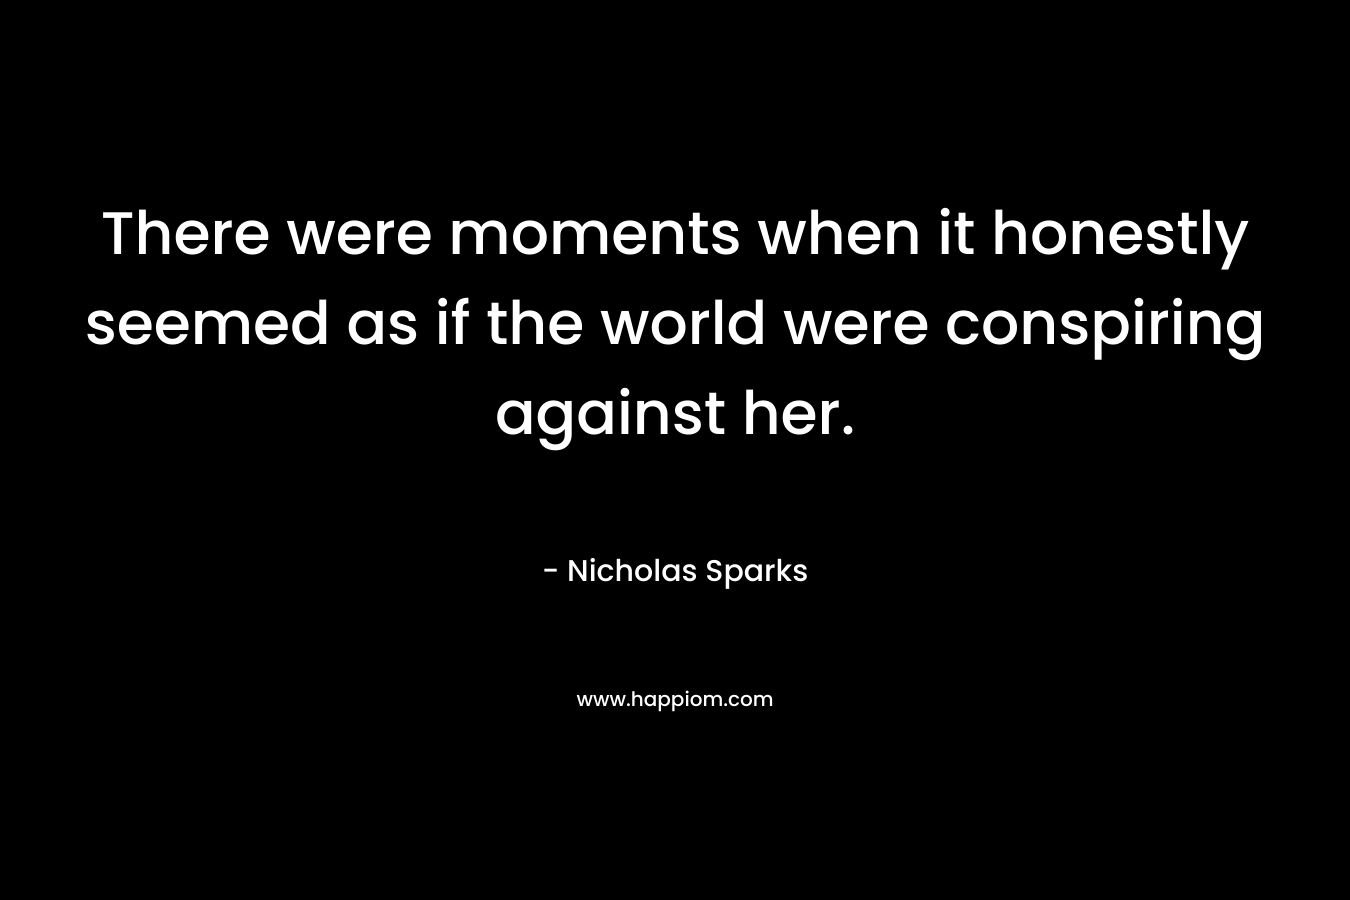 There were moments when it honestly seemed as if the world were conspiring against her.